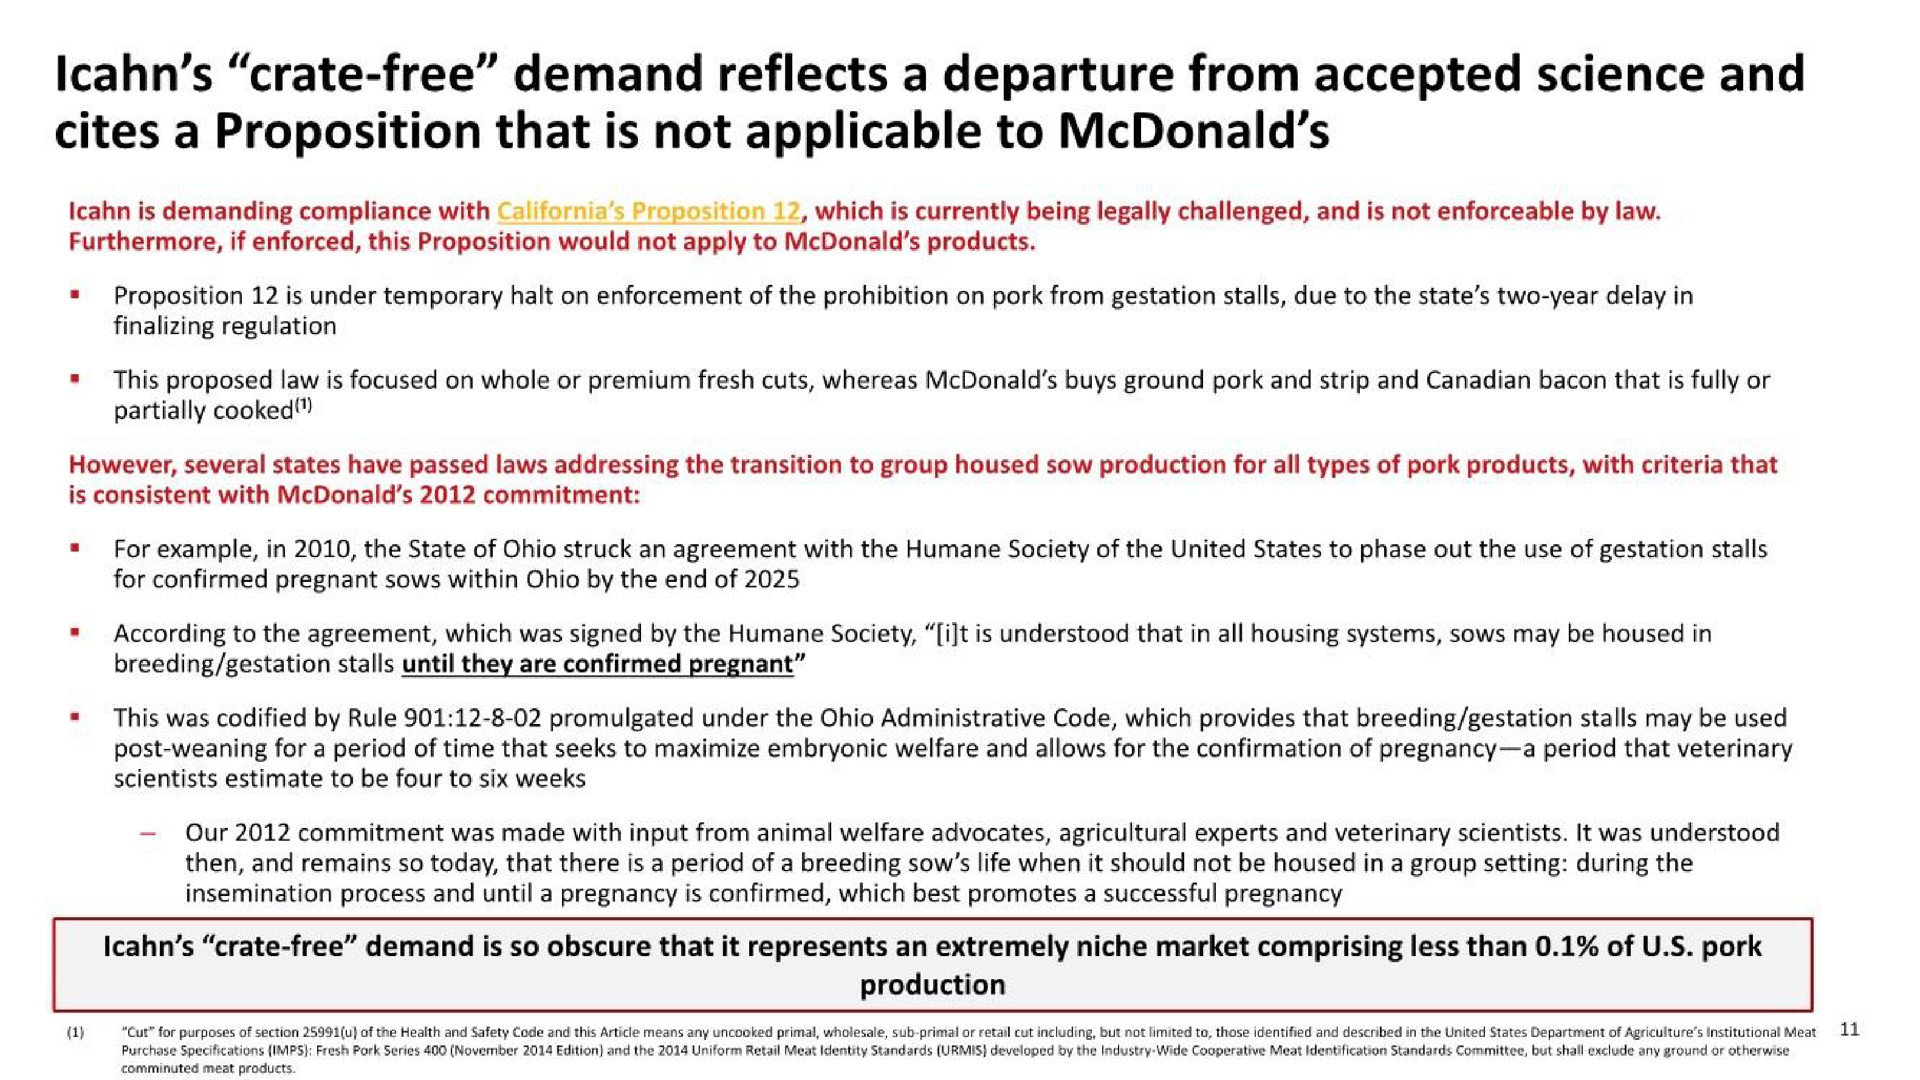 crate free demand reflects a departure from accepted science and cites a proposition that is not applicable to | McDonald's